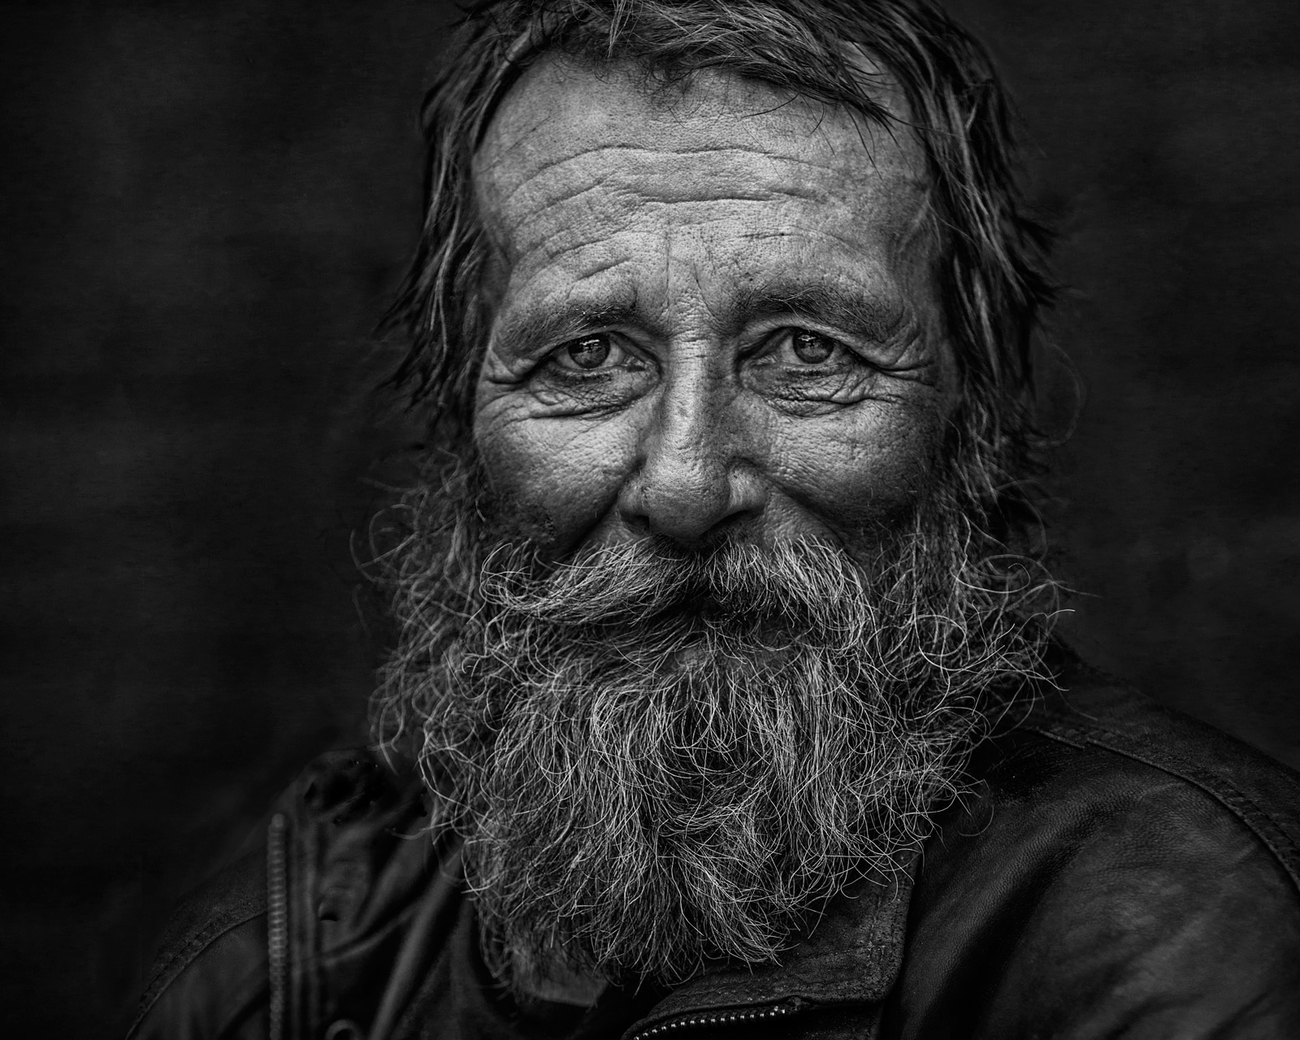 Faces Photo Contest by Focal Press Winners